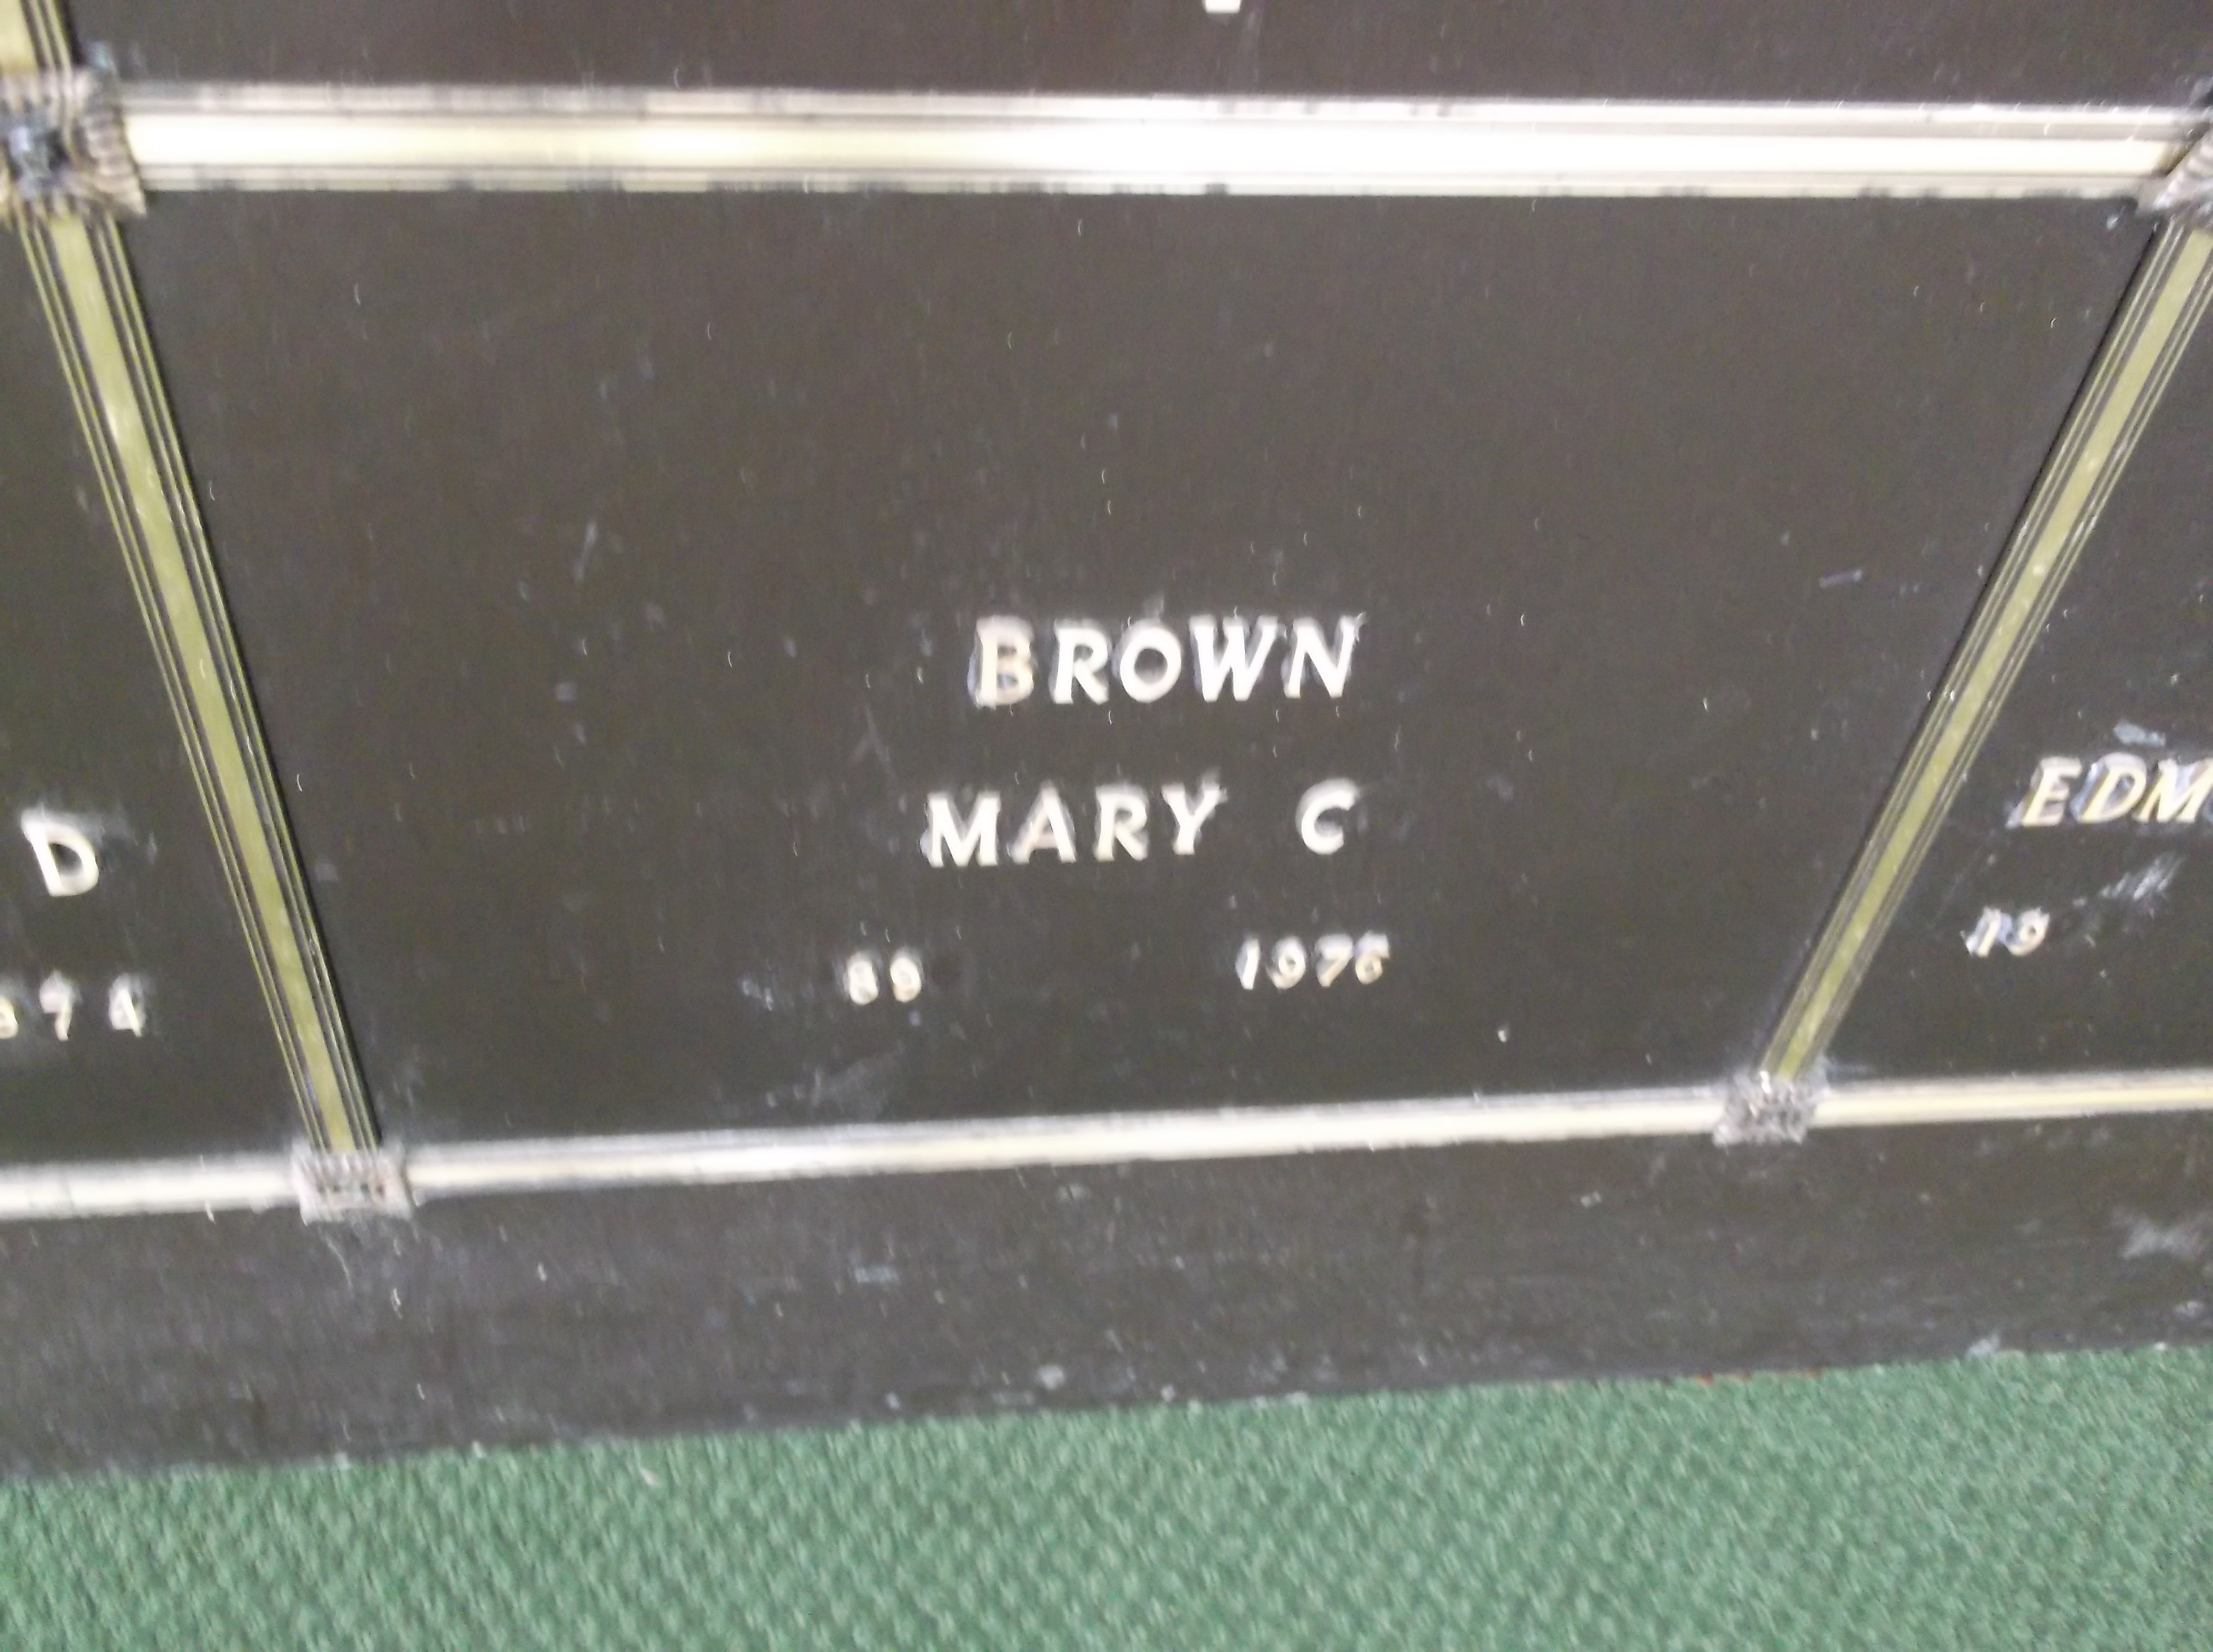 Mary C Brown